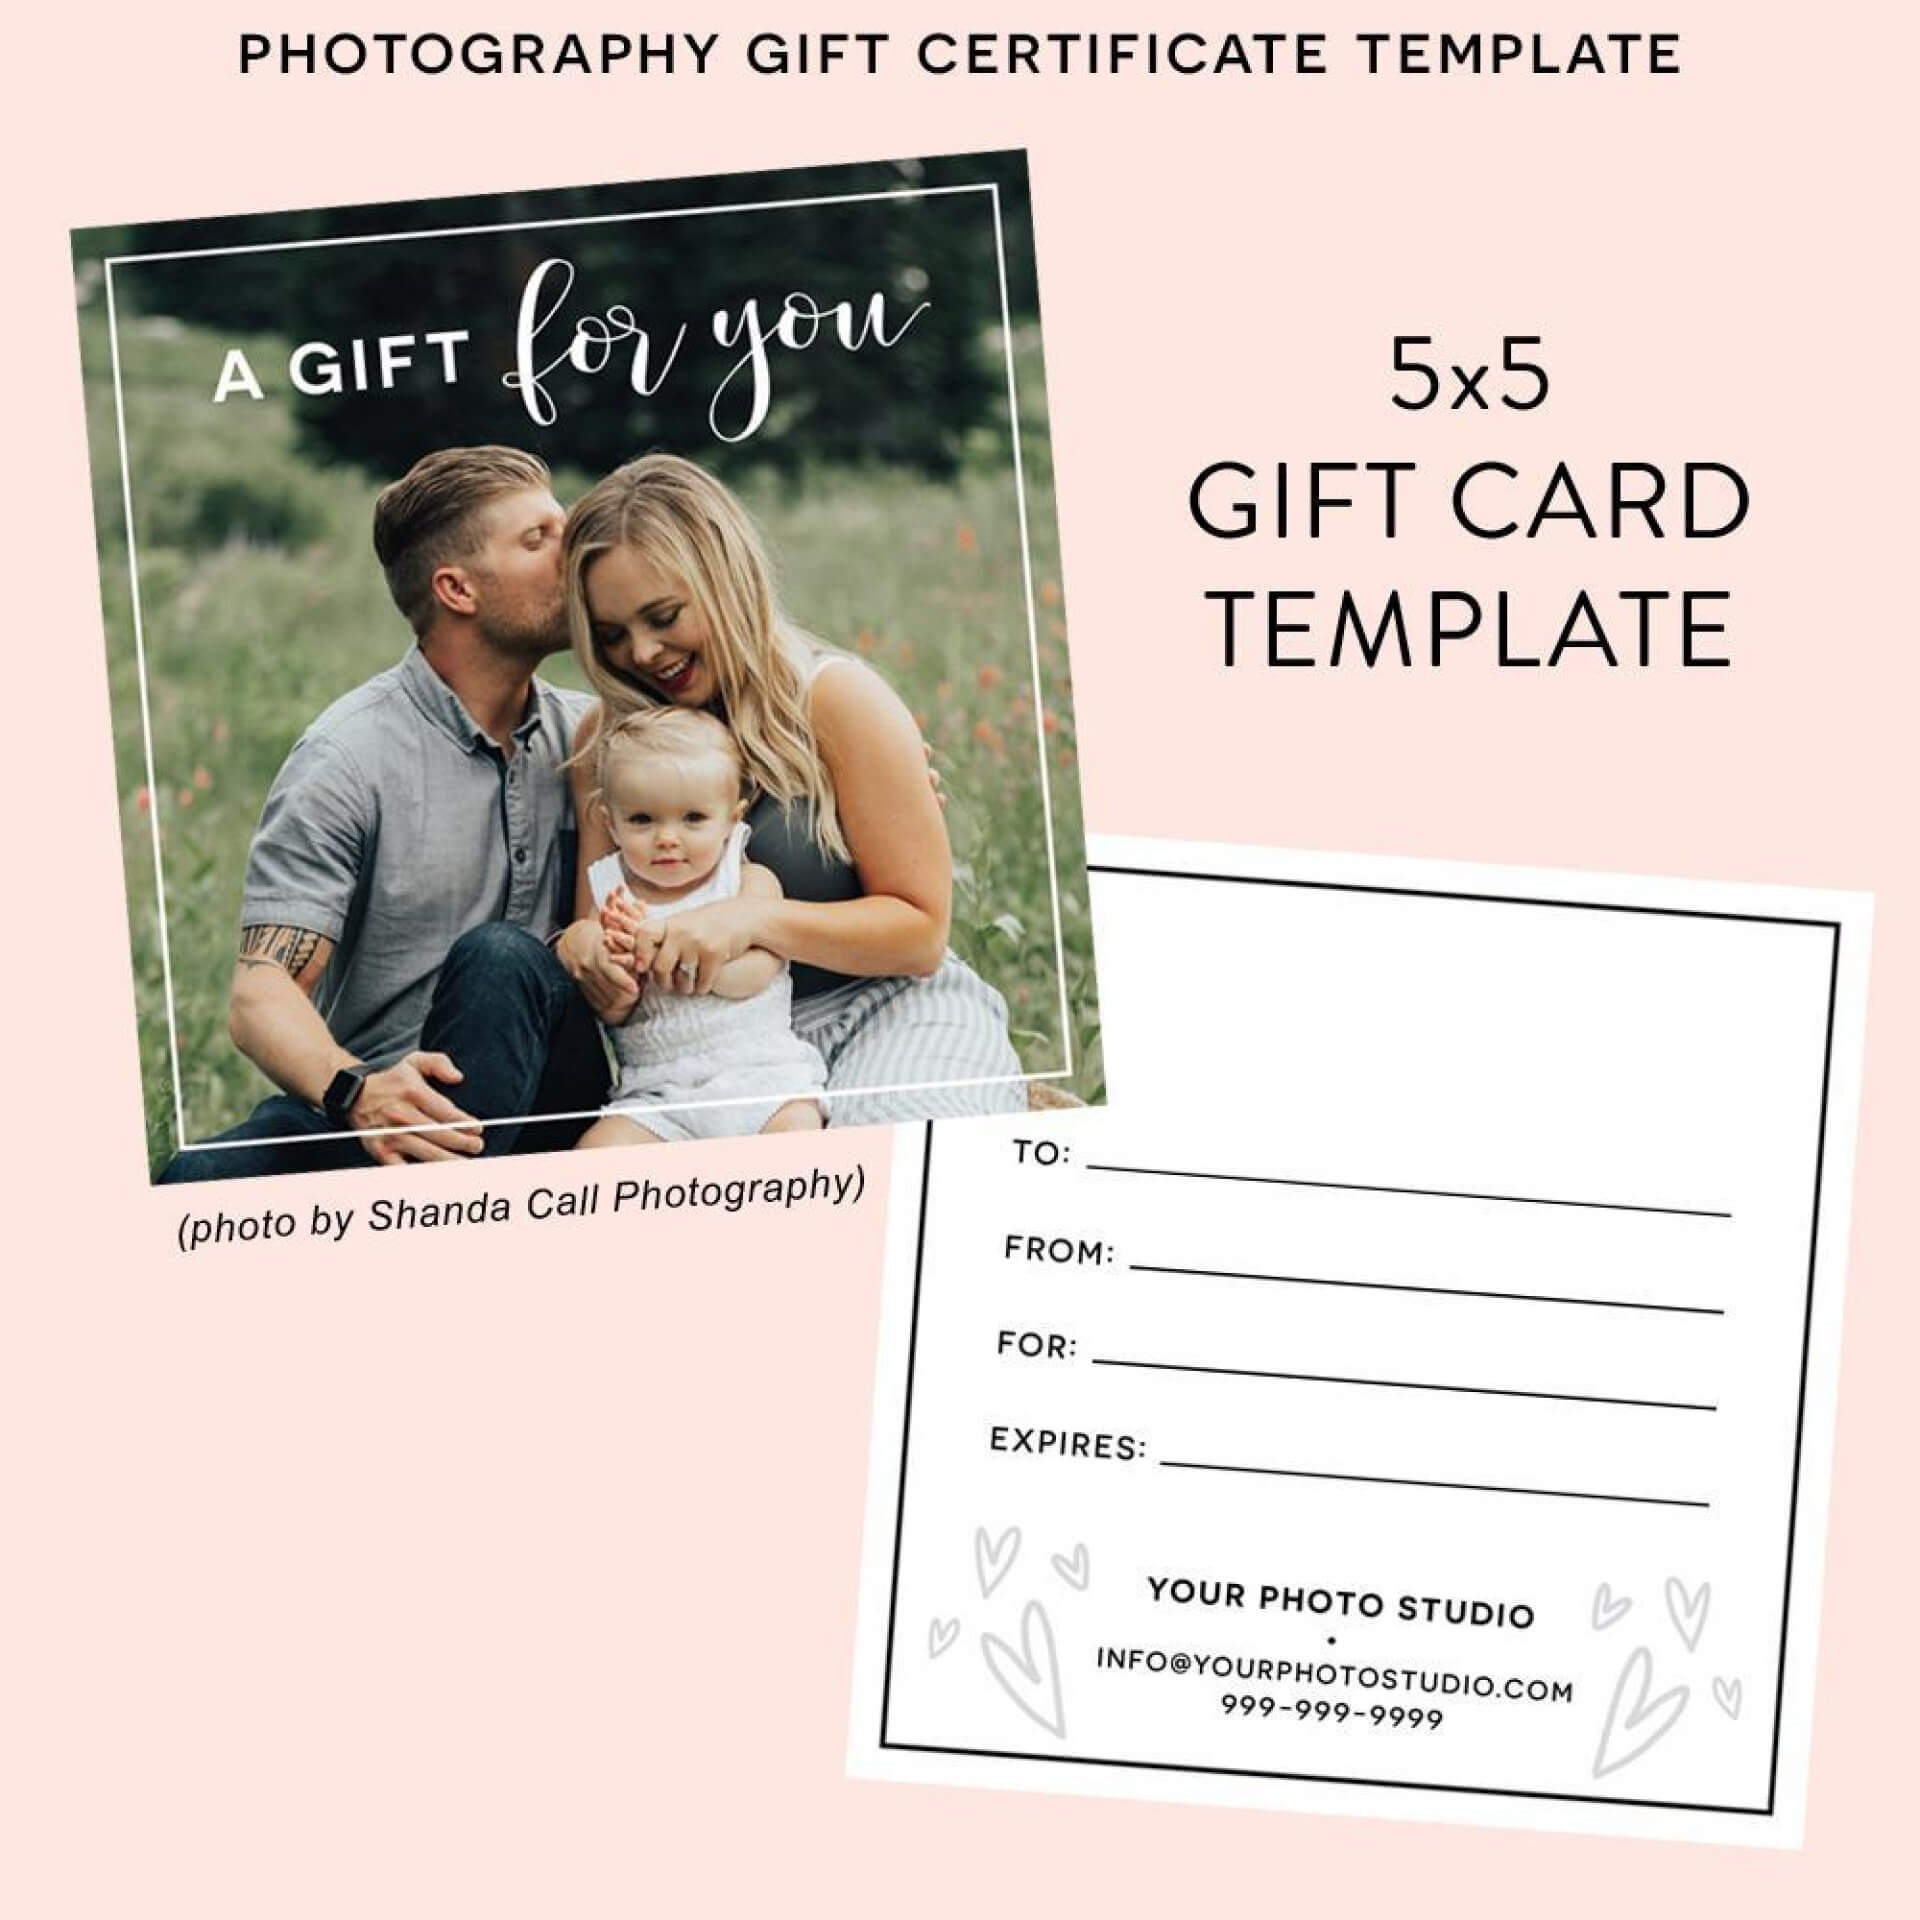 038 Photography Gift Certificate Template Photoshop Free Inside Gift Certificate Template Photoshop